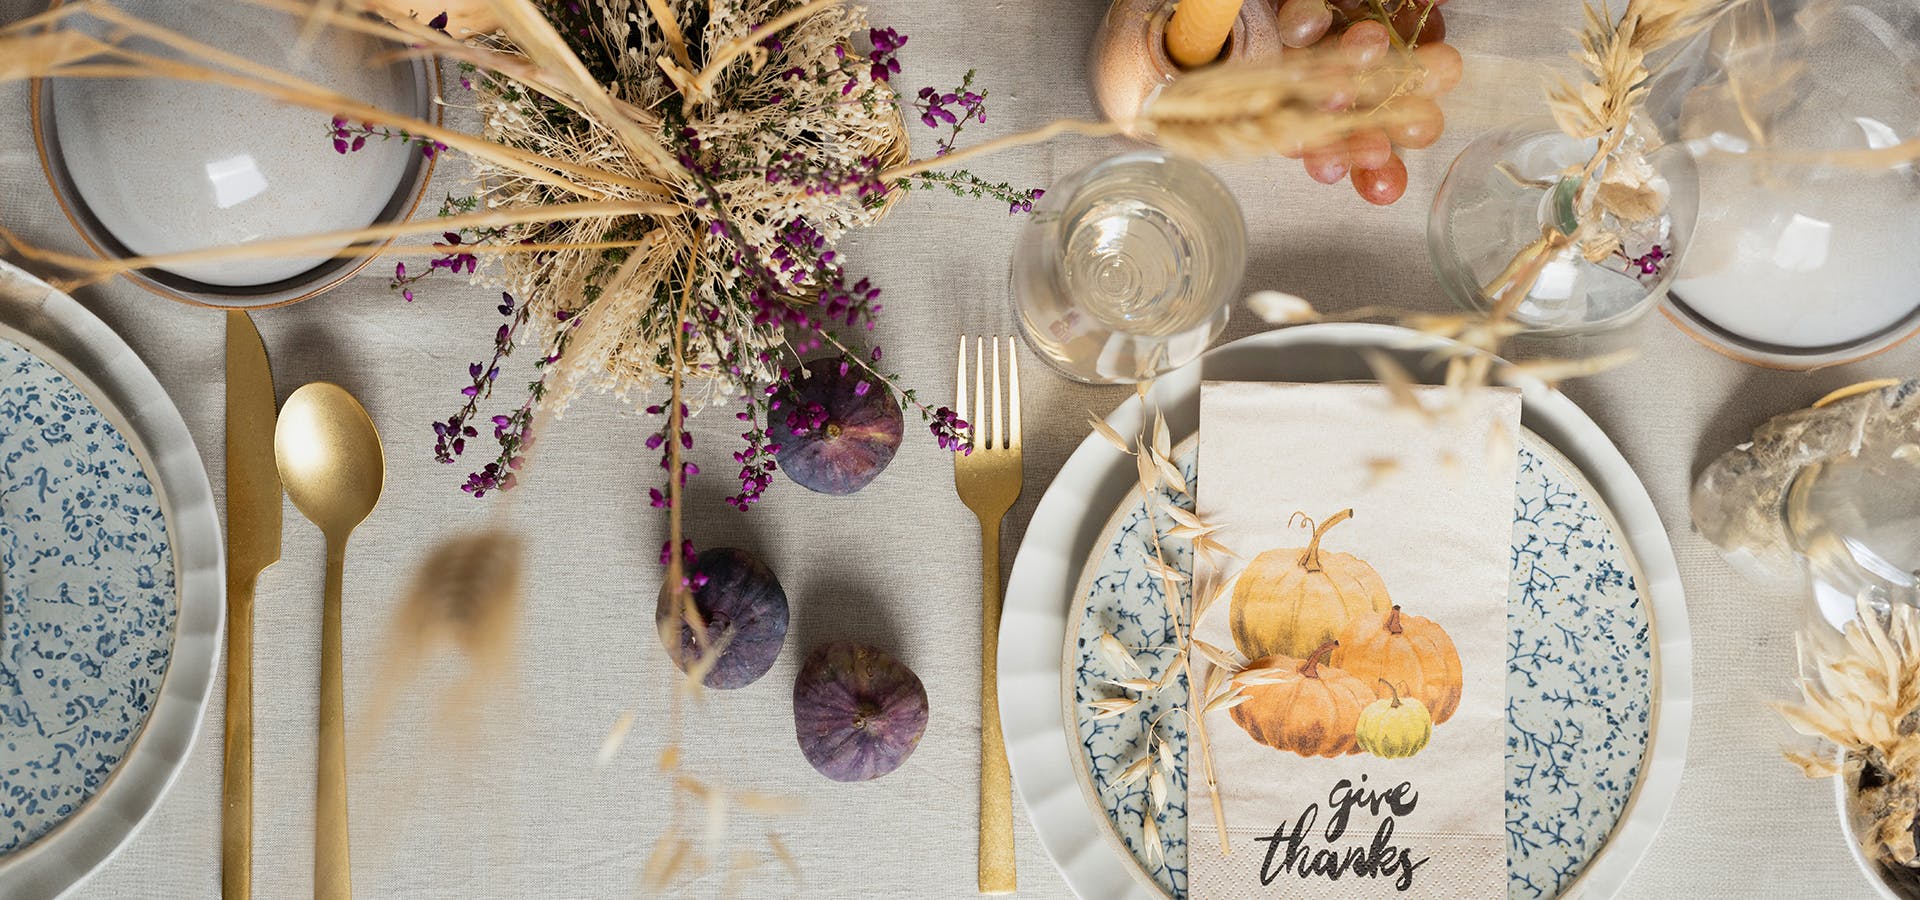 How To Host A Friendsgiving & DIY Kraft Paper Table Runner - At Home with  Jemma